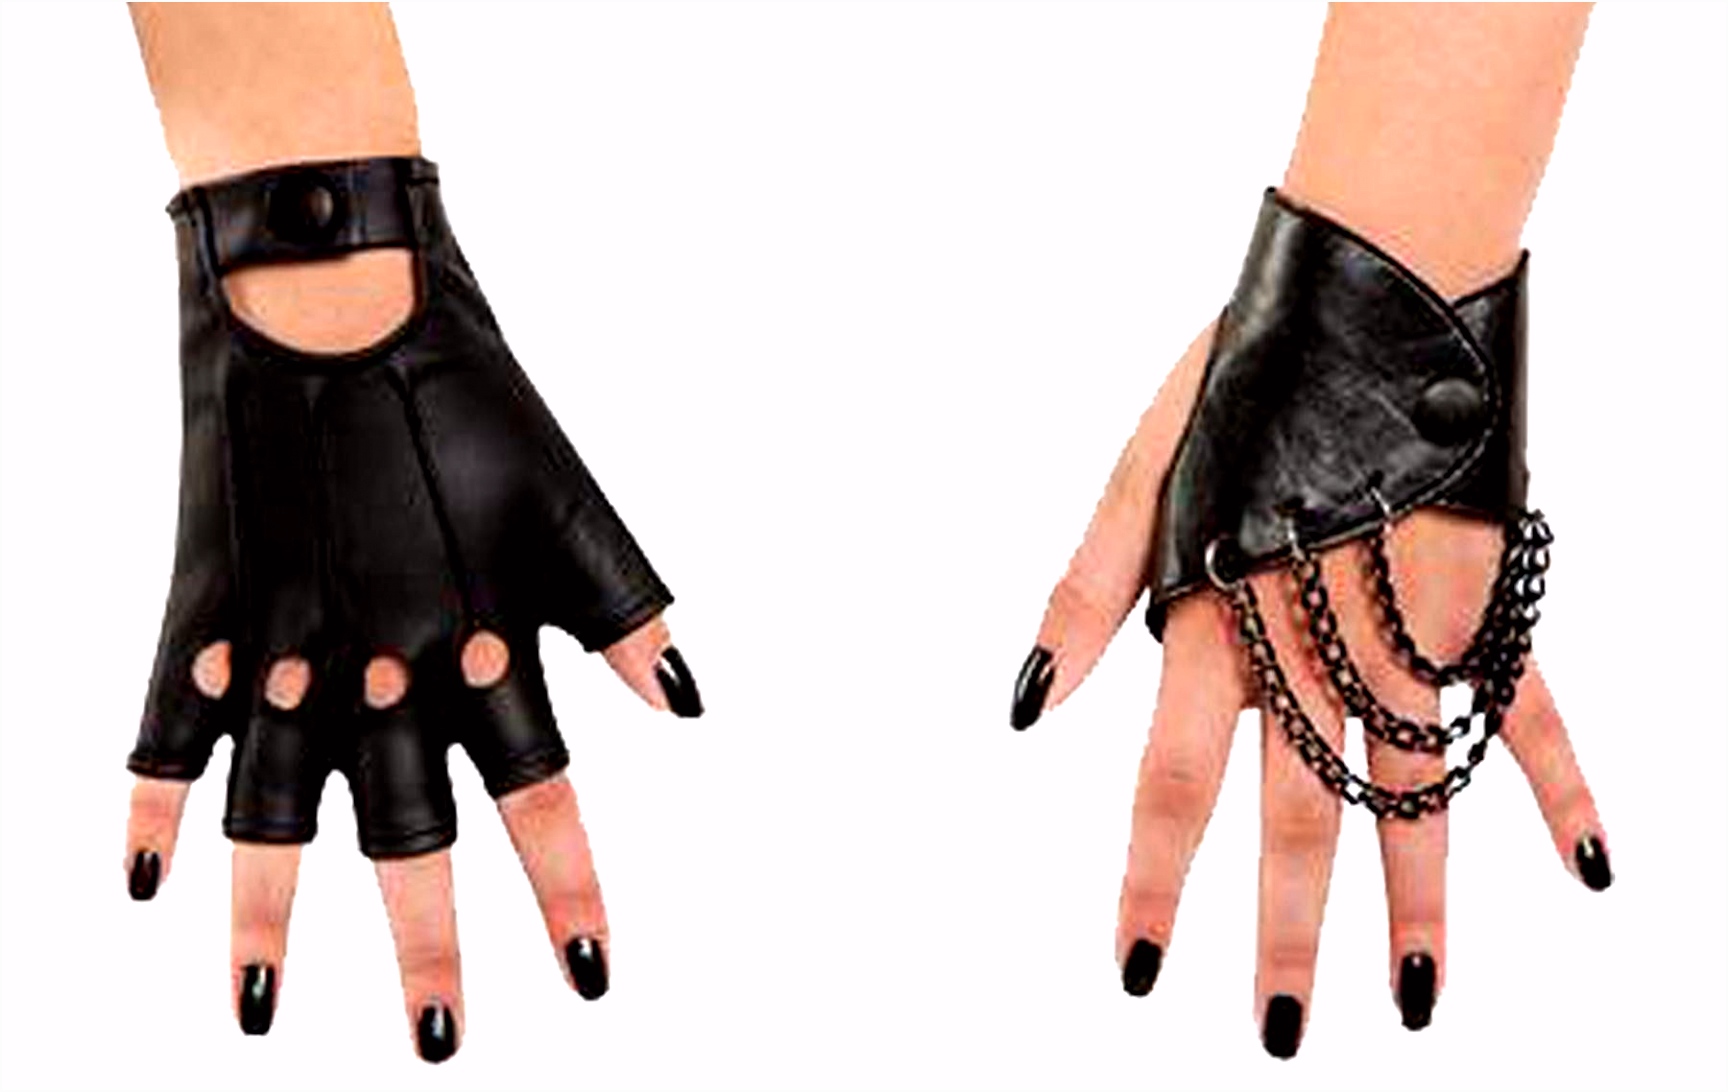 Mal fingerless gloves with chain accents on one glove and open